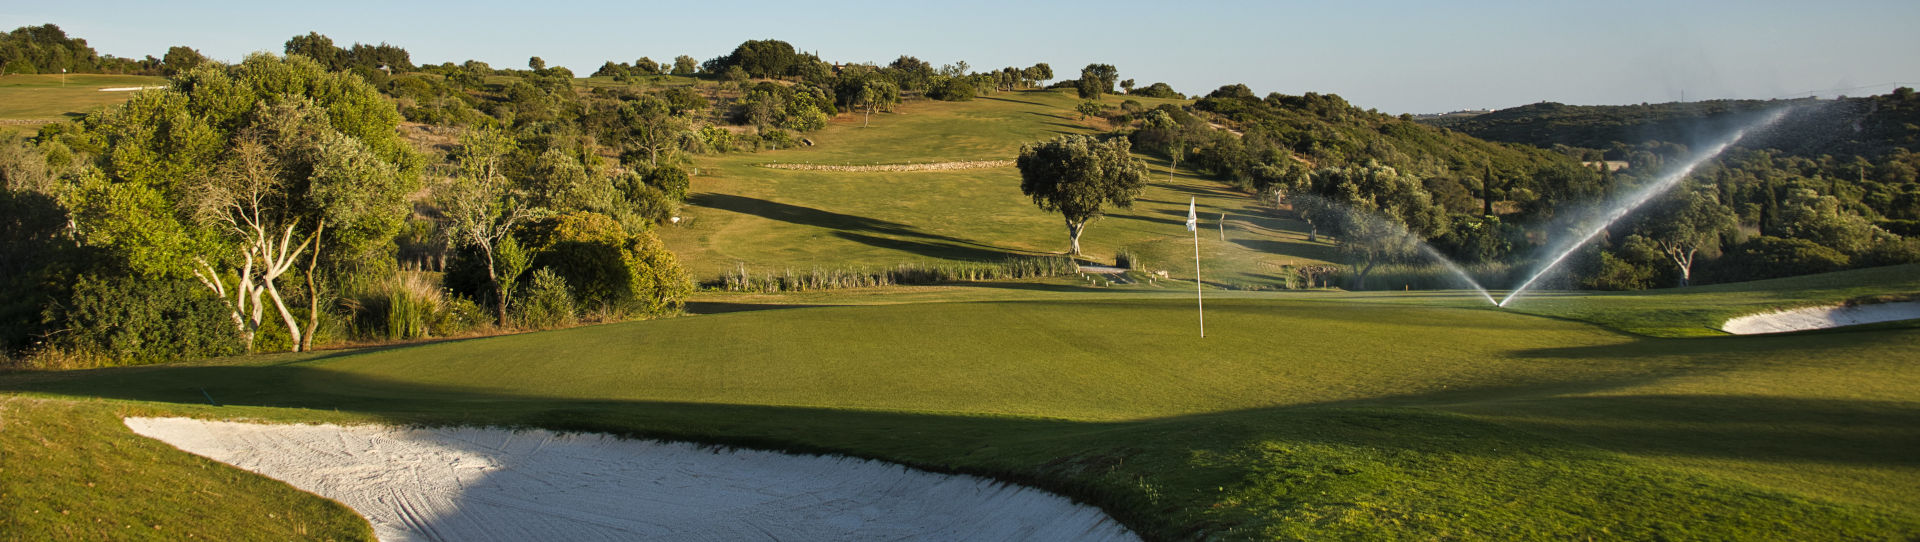 Portugal golf holidays - Espiche Weekly Pass - Photo 3